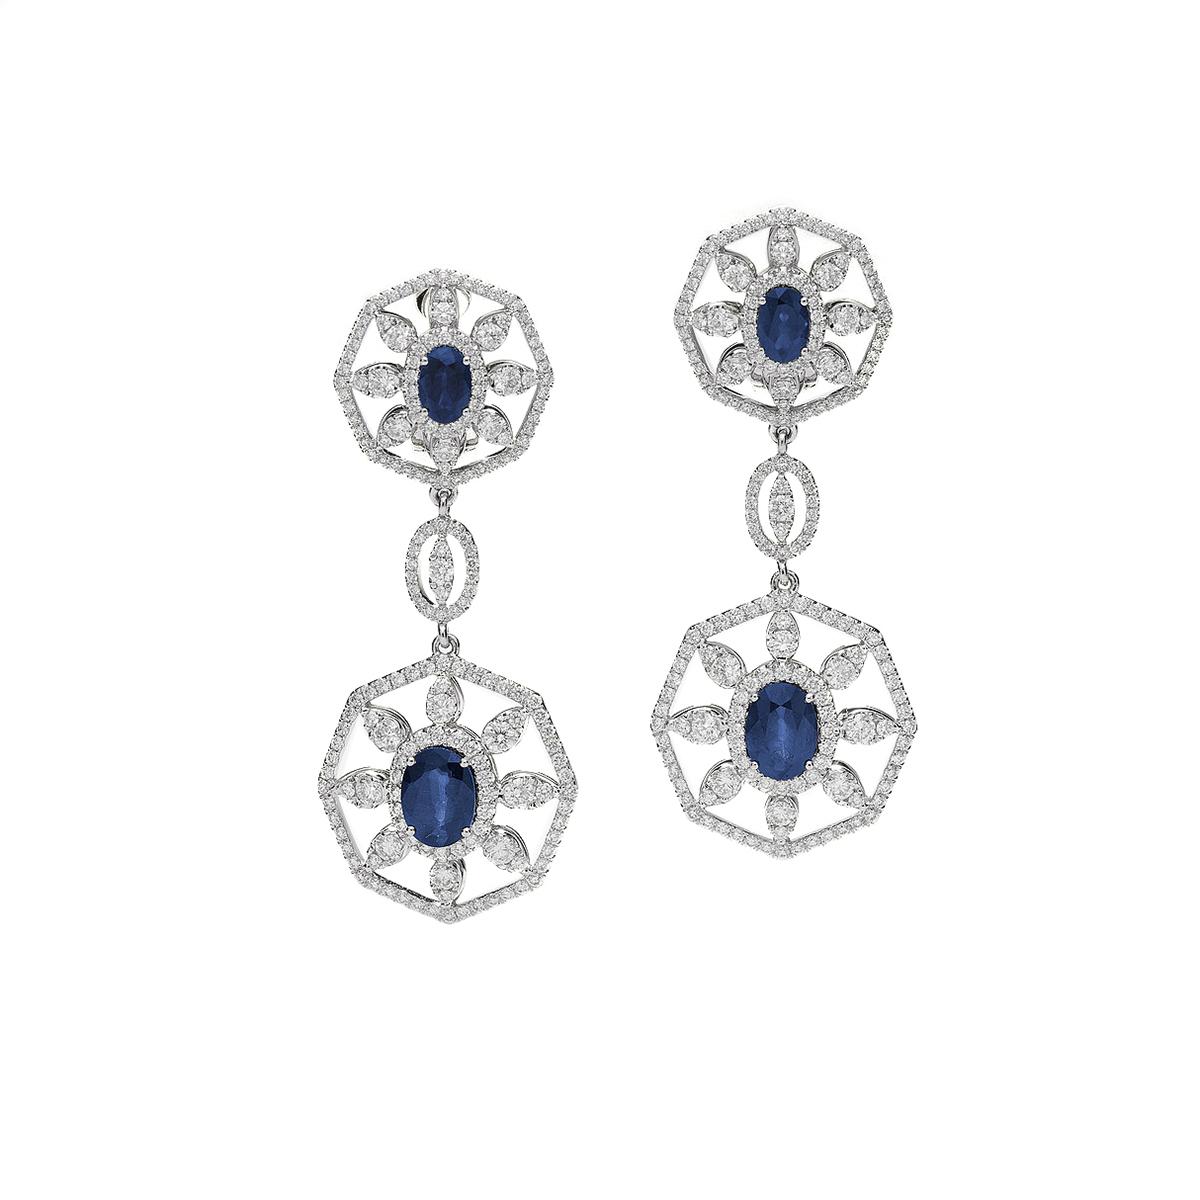 Earrings in 18kt white gold set with 4 oval cut sapphires 4.41 cts and 374 diamonds 3.35 cts